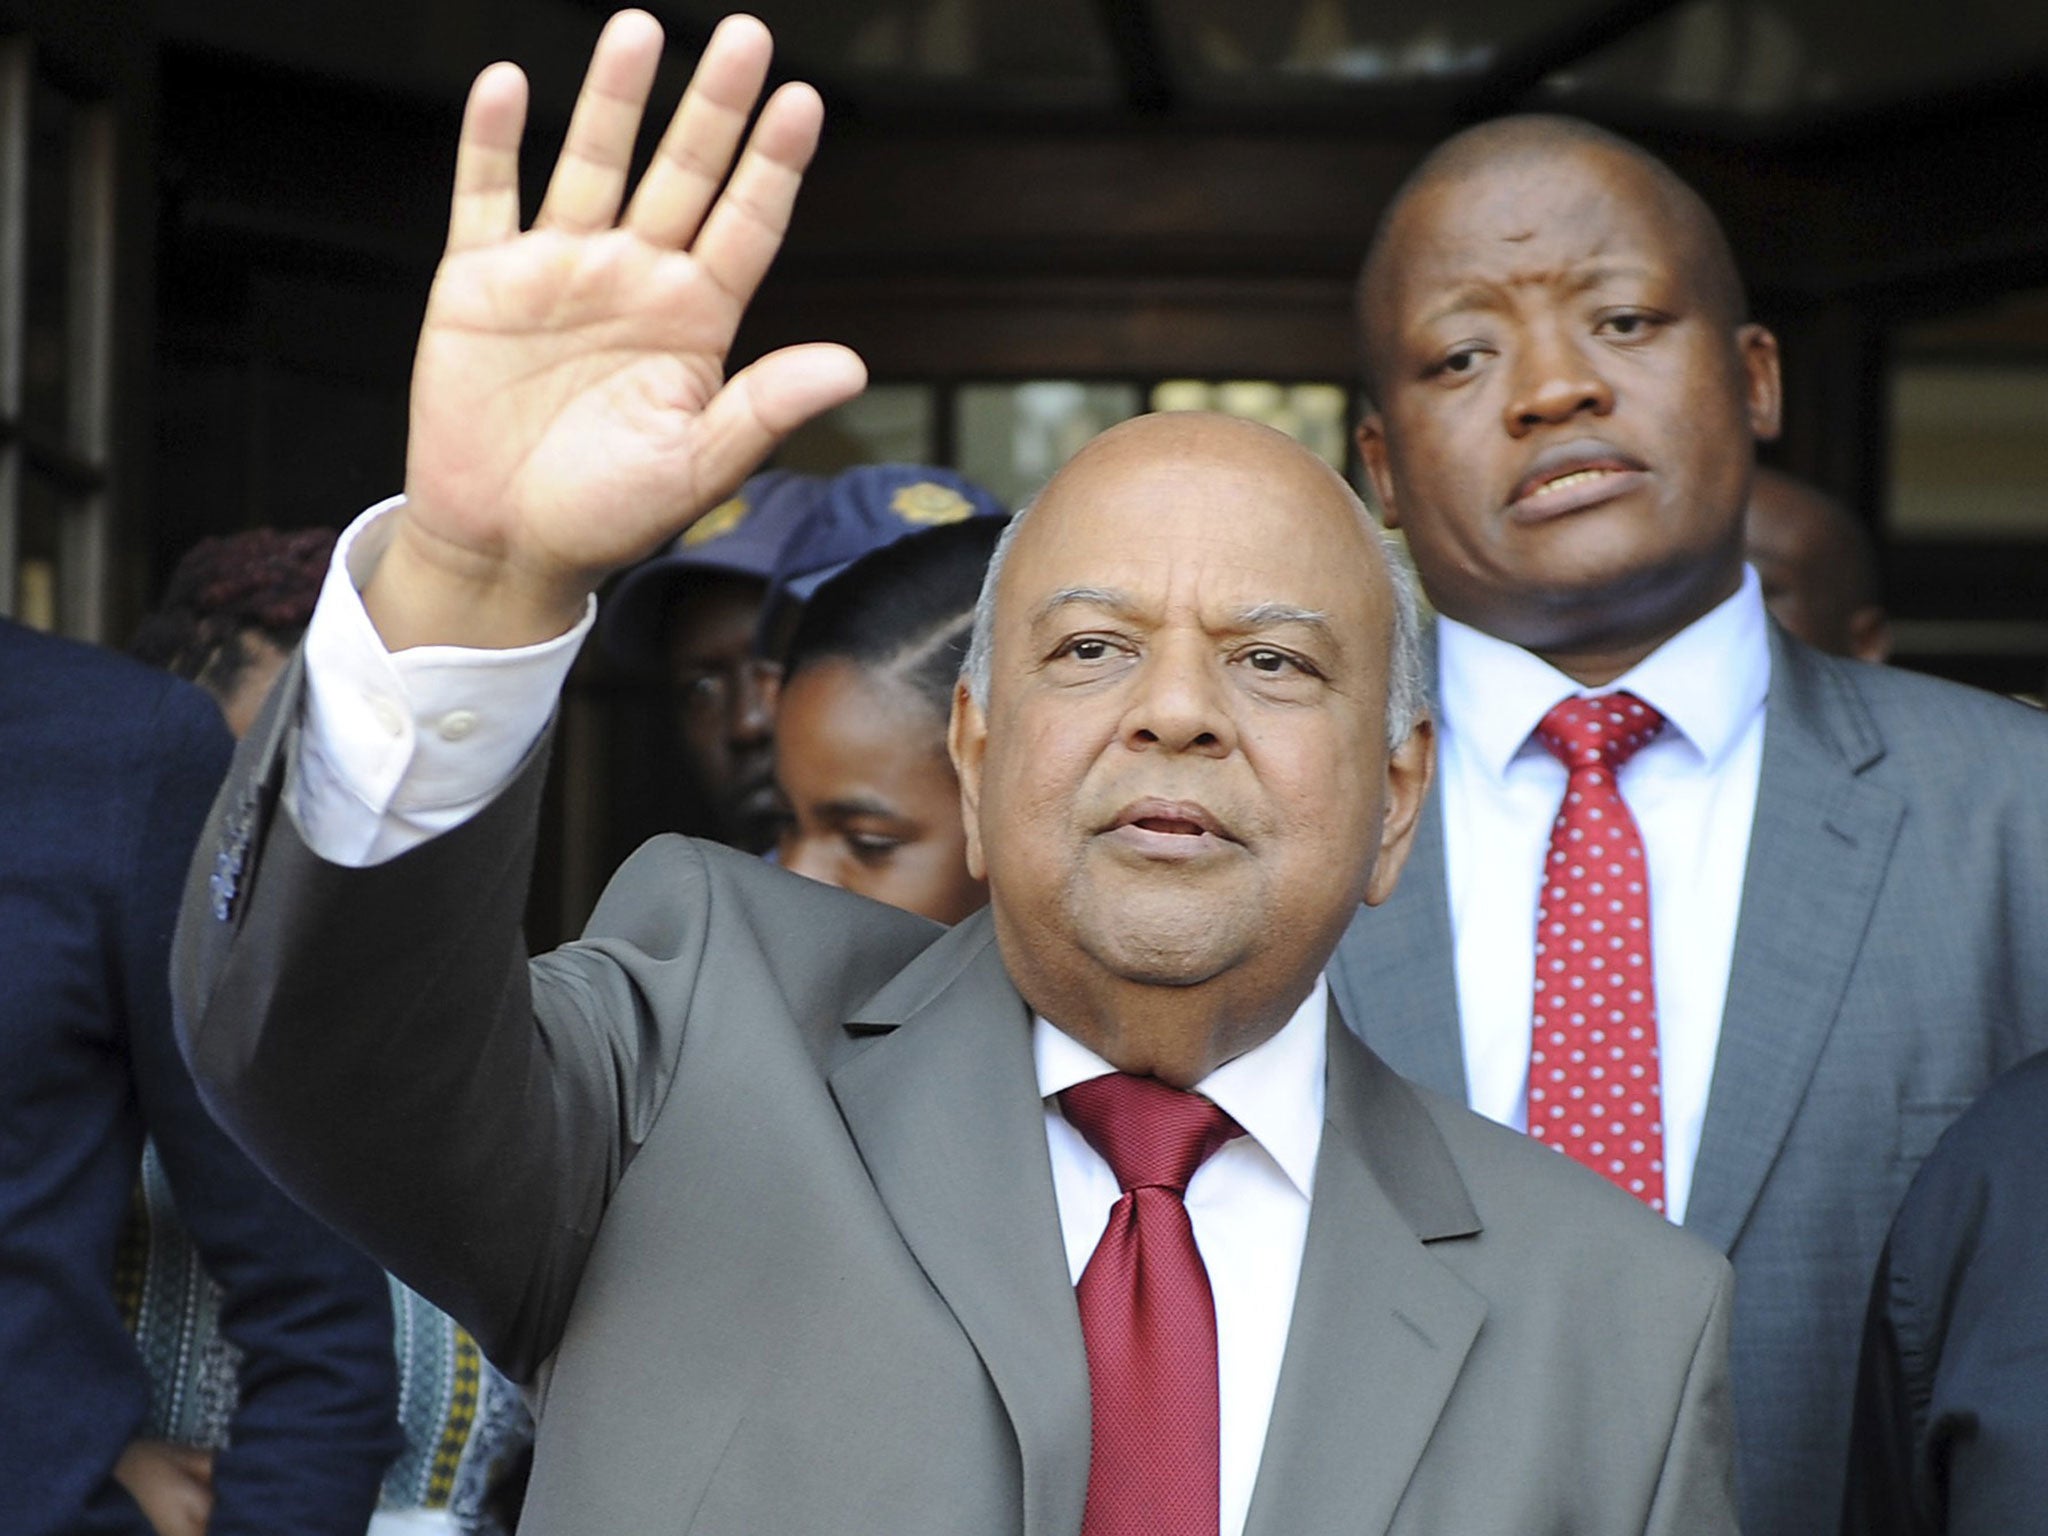 Well-regarded finance minister Pravin Gordhan has lost his job in the reshuffle